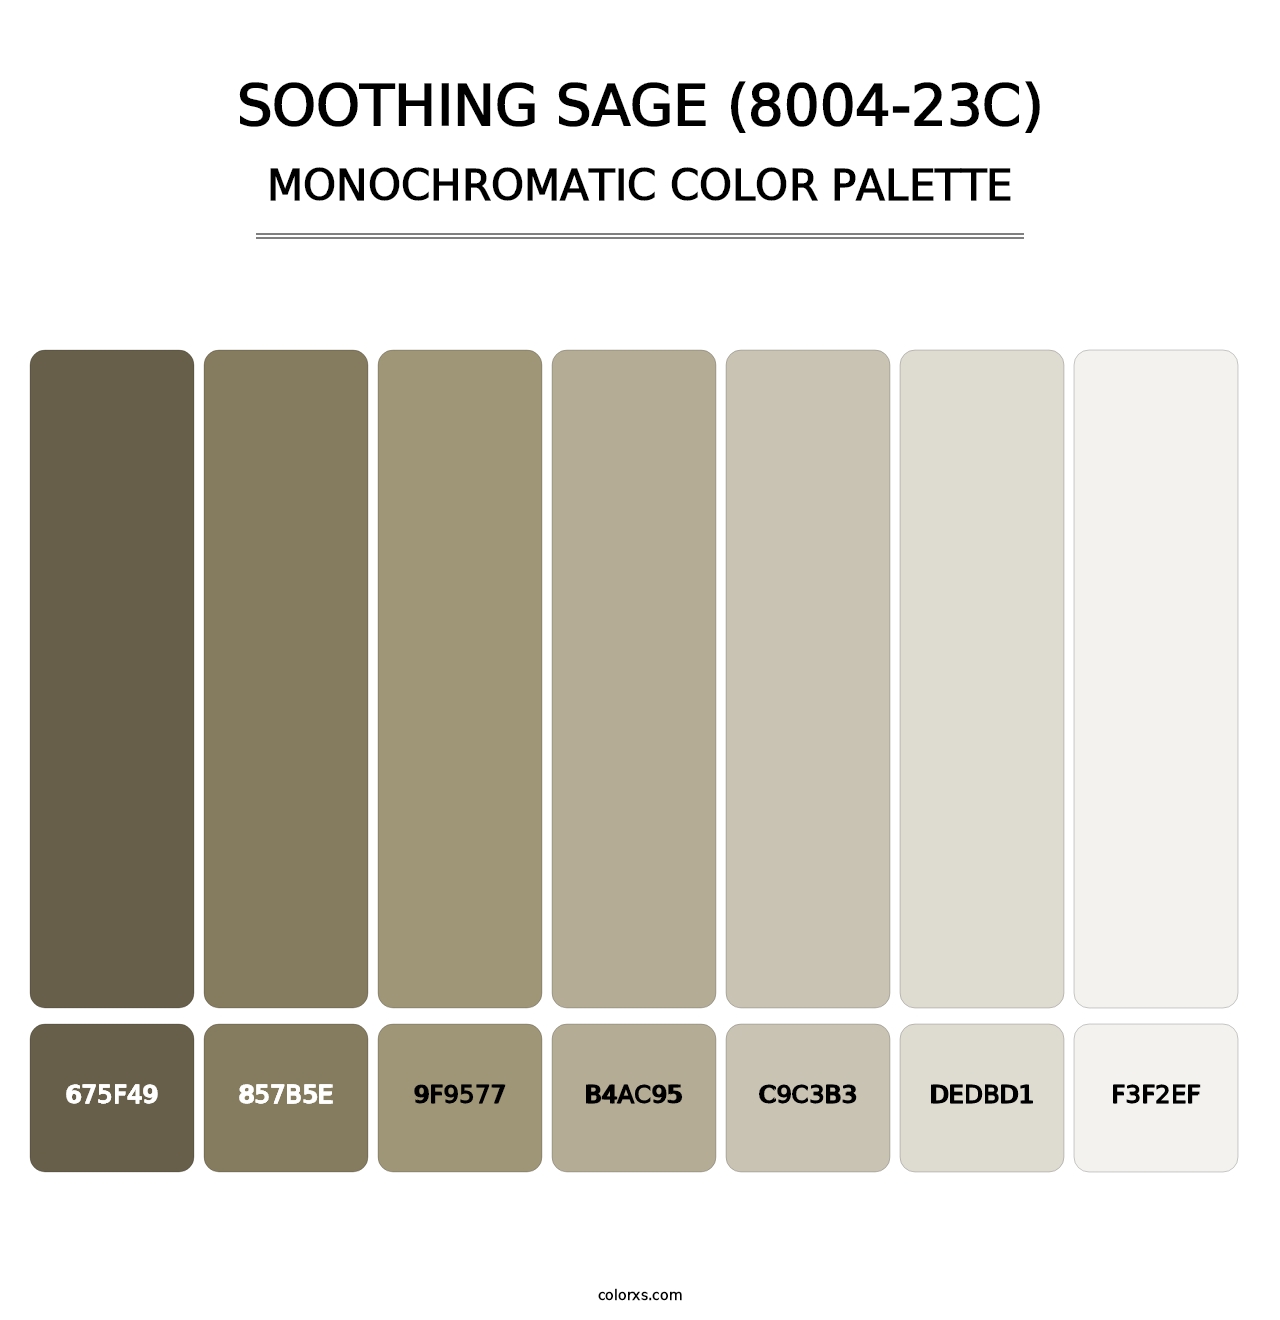 Soothing Sage (8004-23C) - Monochromatic Color Palette